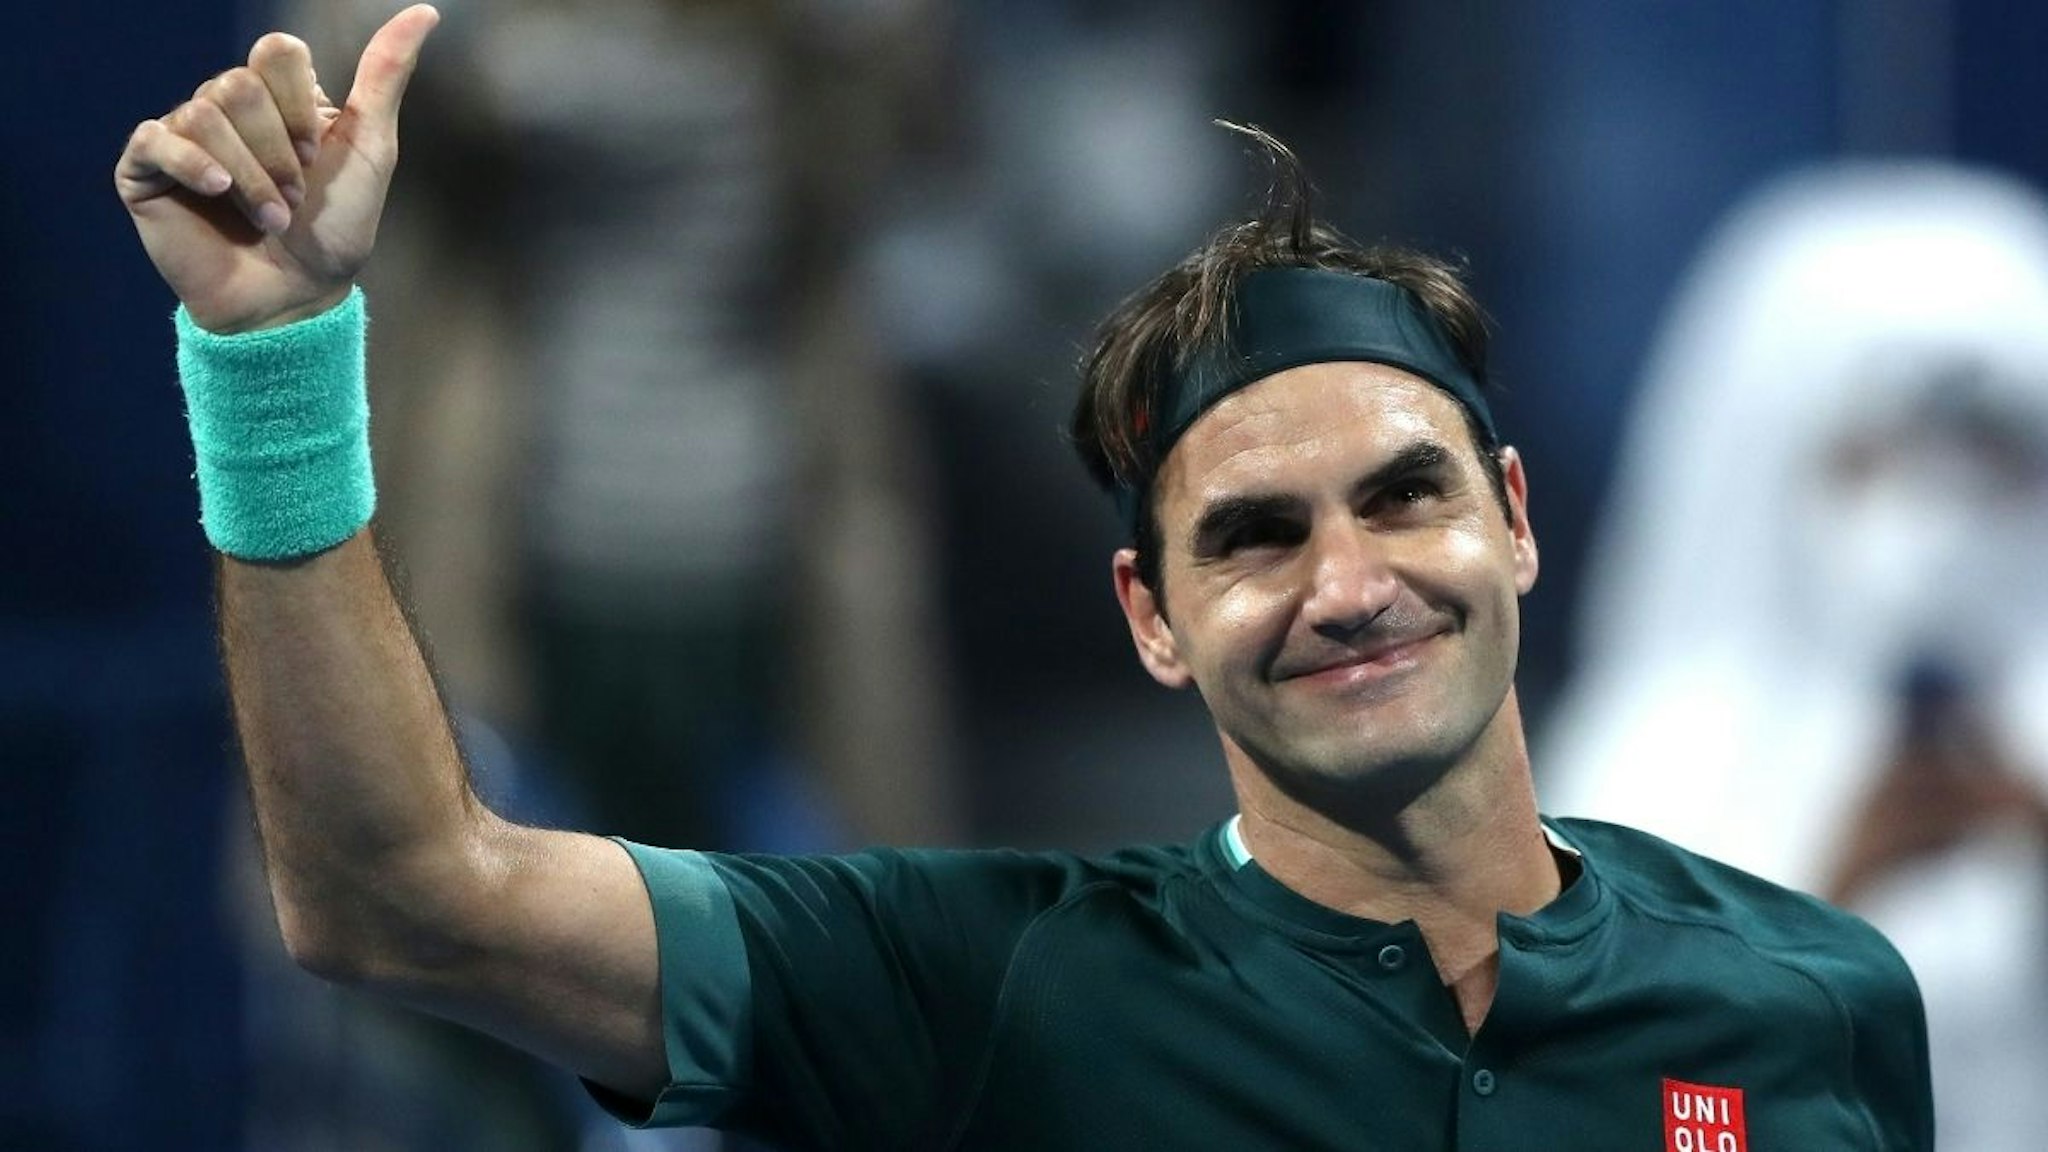 Roger Federer of Switzerland celebrates winning his match against Dan Evans of Great Britain on Day 3 of the Qatar ExxonMobil Open at Khalifa International Tennis and Squash Complex on March 10, 2021 in Doha, Qatar.